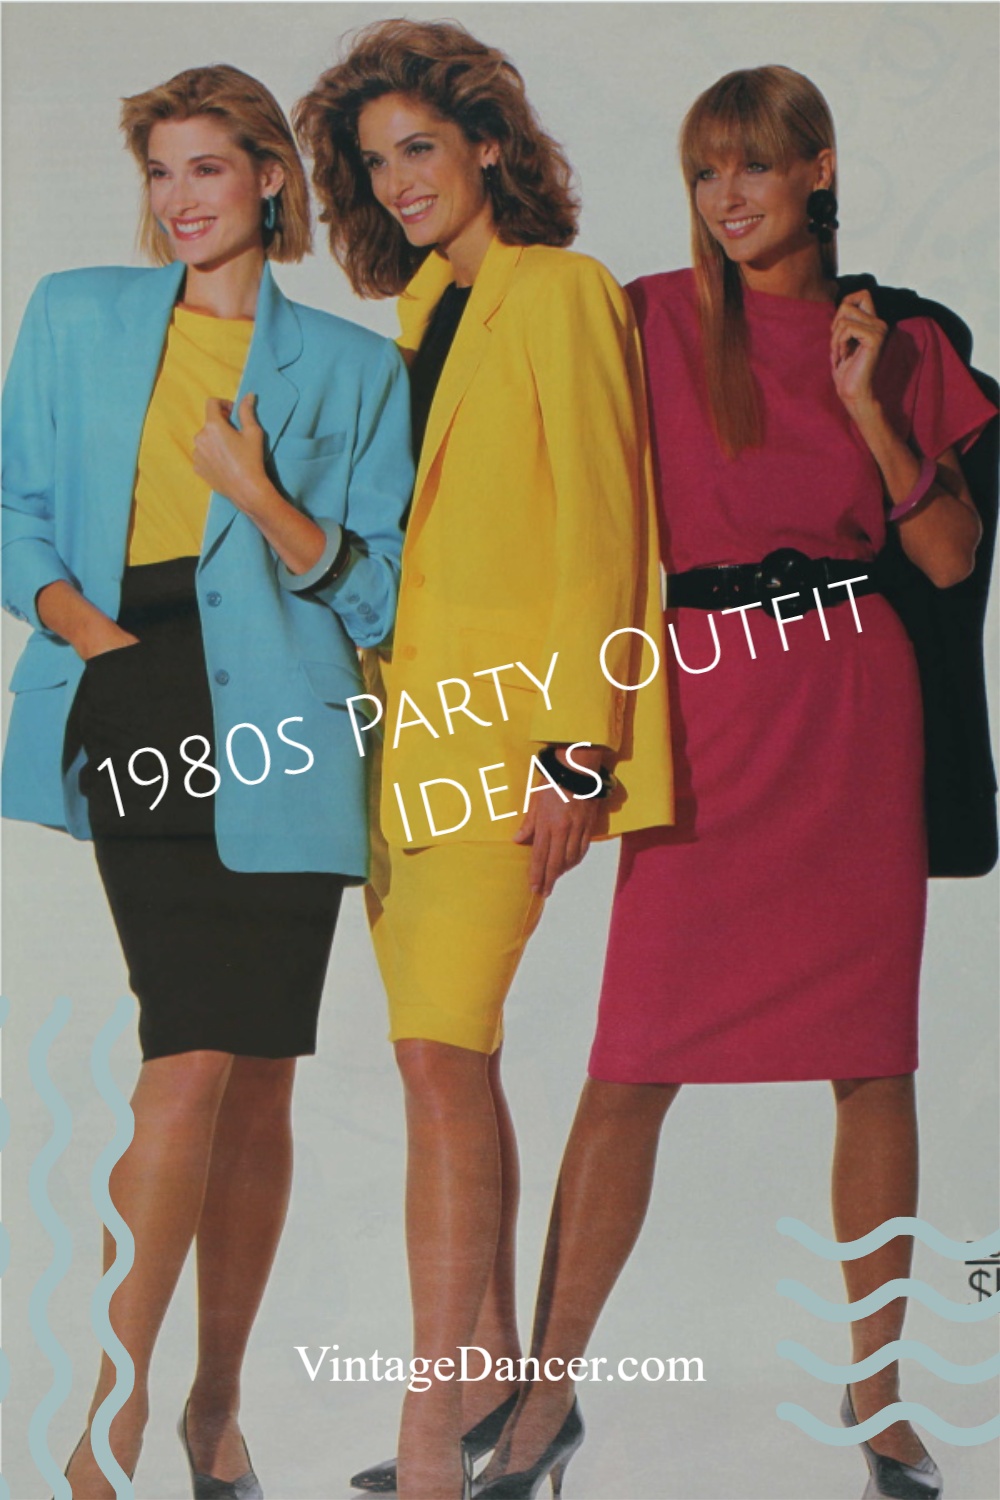 https://vintagedancer.com/wp-content/uploads/1980s-party-outfits-power-suits-girls-women-pin.jpg